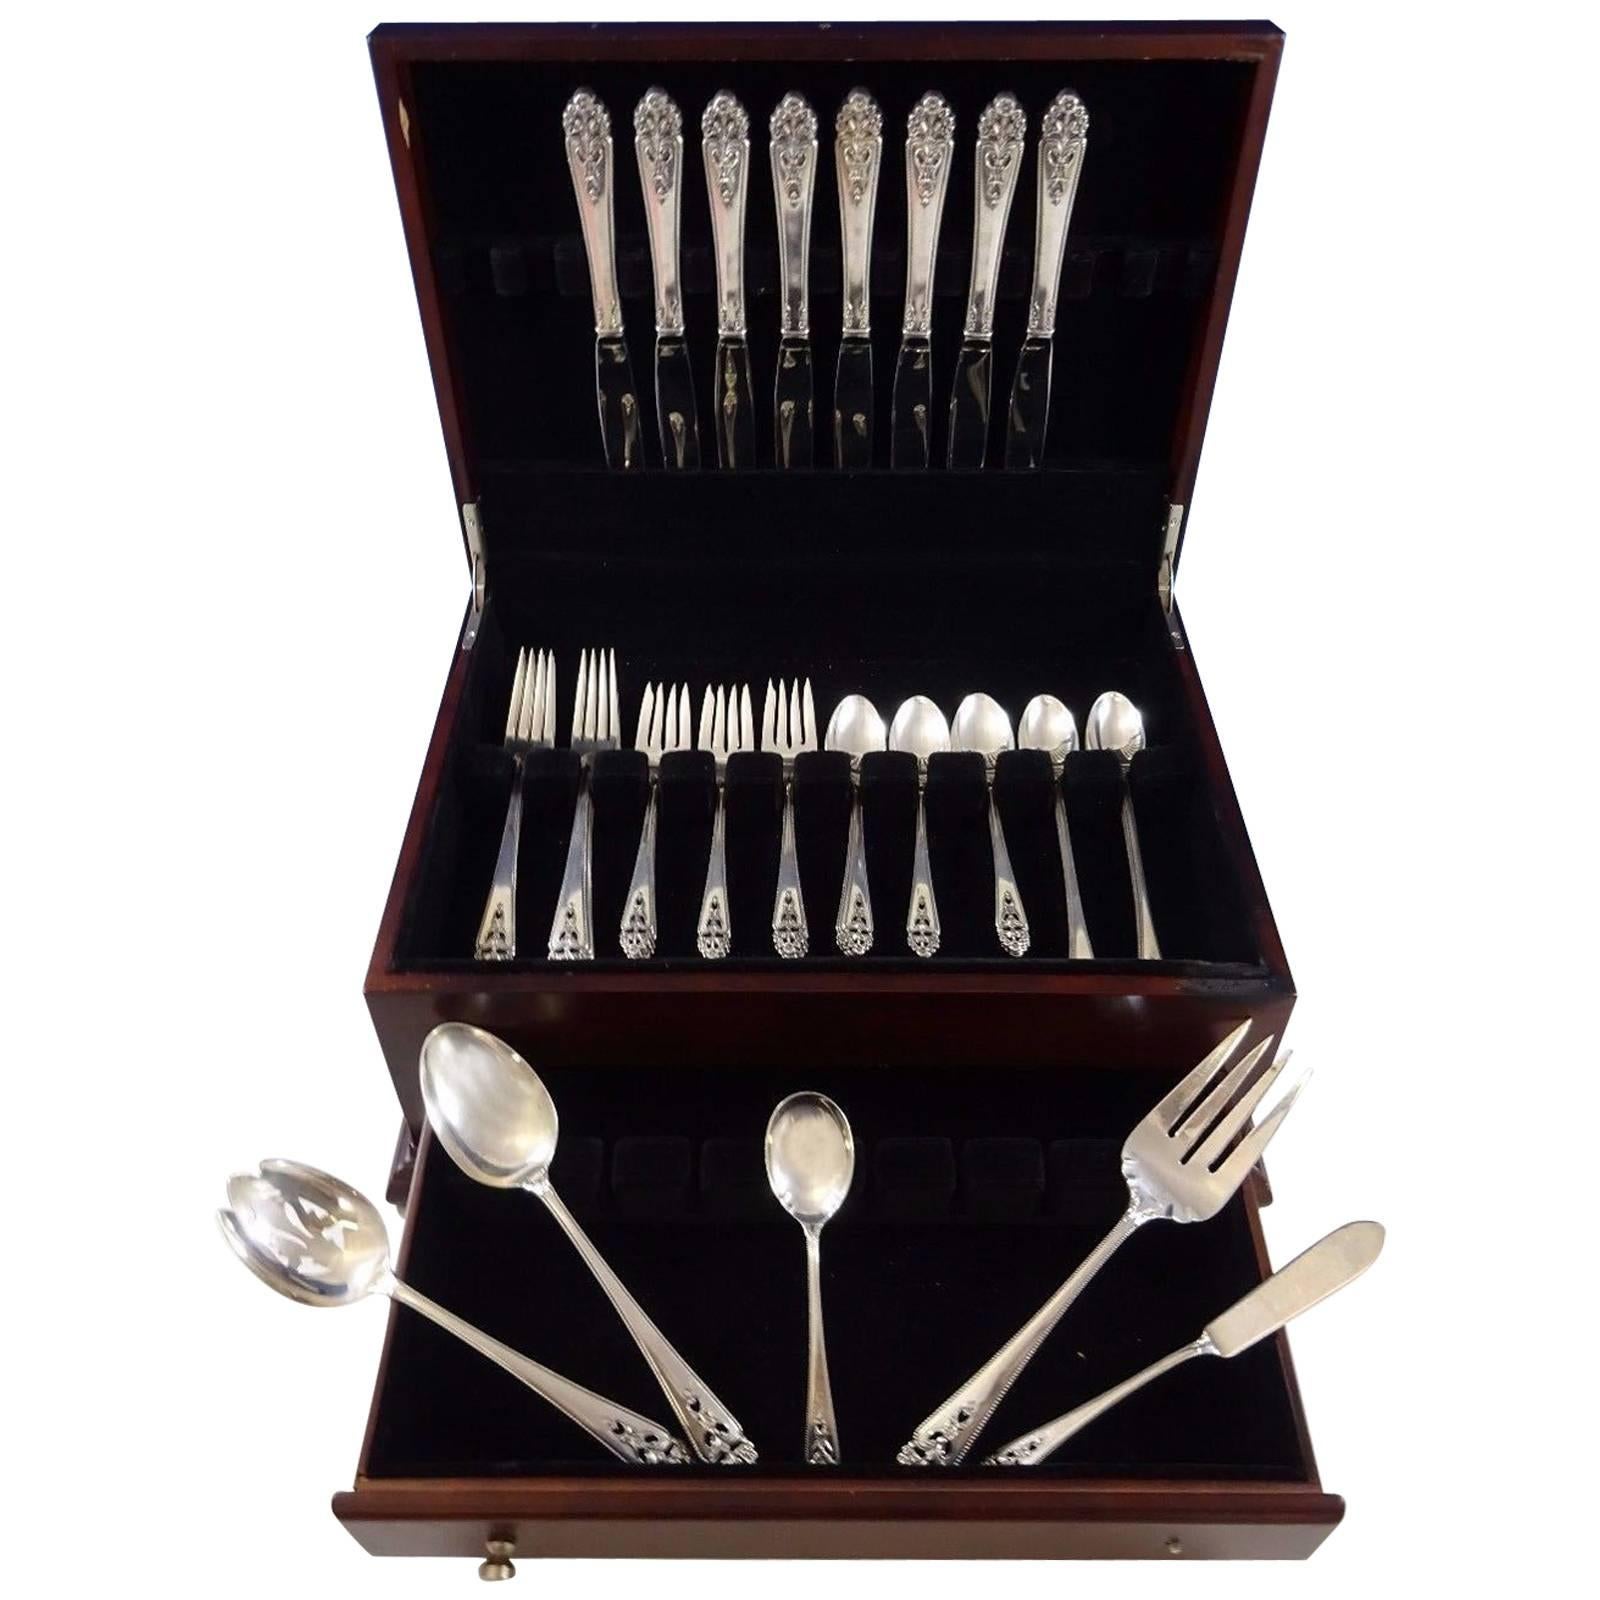 Lovely Queens Lace by international sterling silver flatware set, 45 Pieces. This set includes: 

Eight dinner size knives, 9 5/8